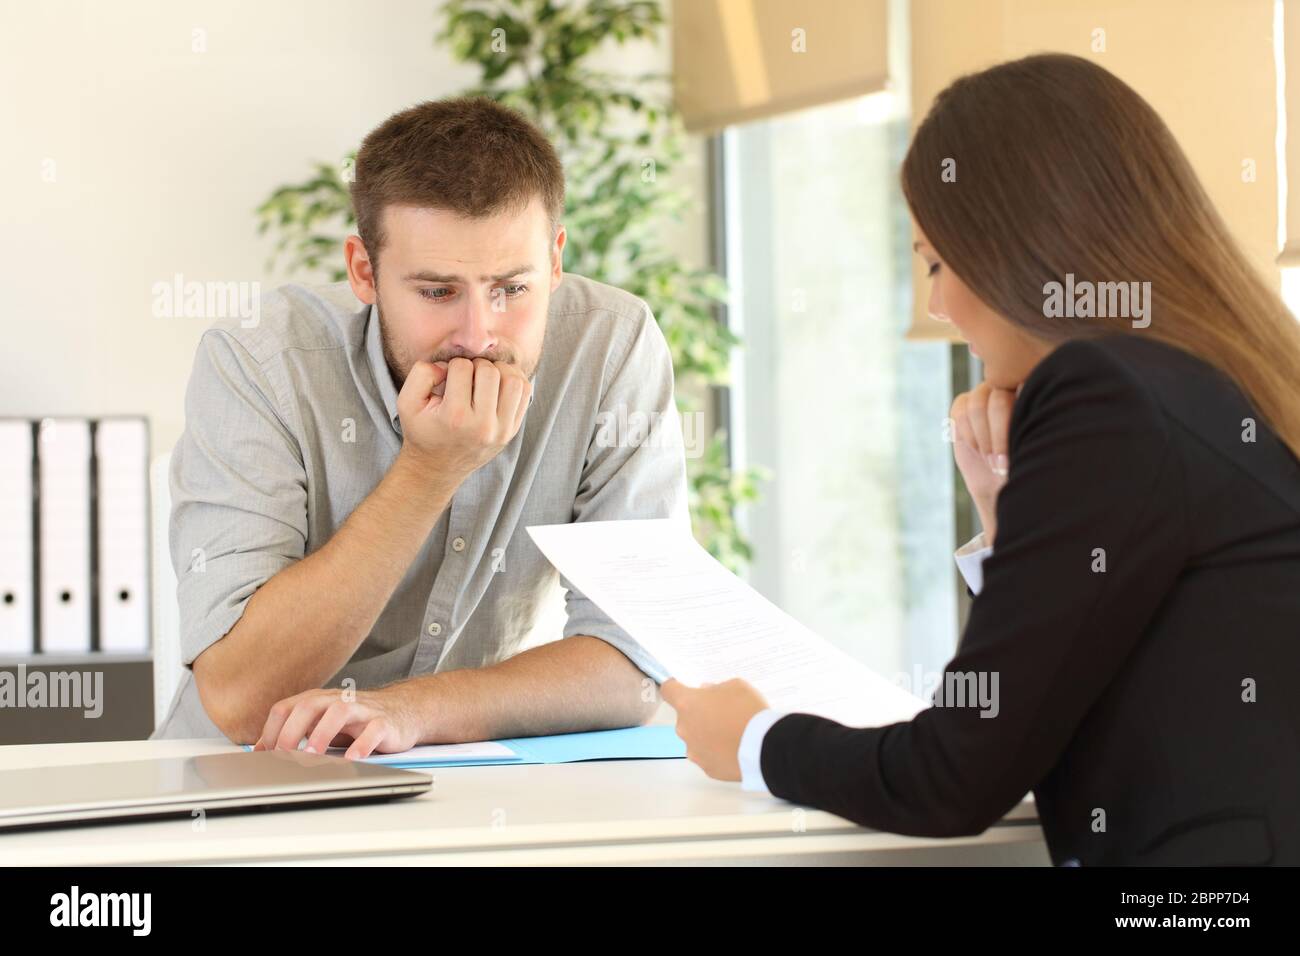 Nervous man looking how the interviewer is reading his resume during a job interview Stock Photo